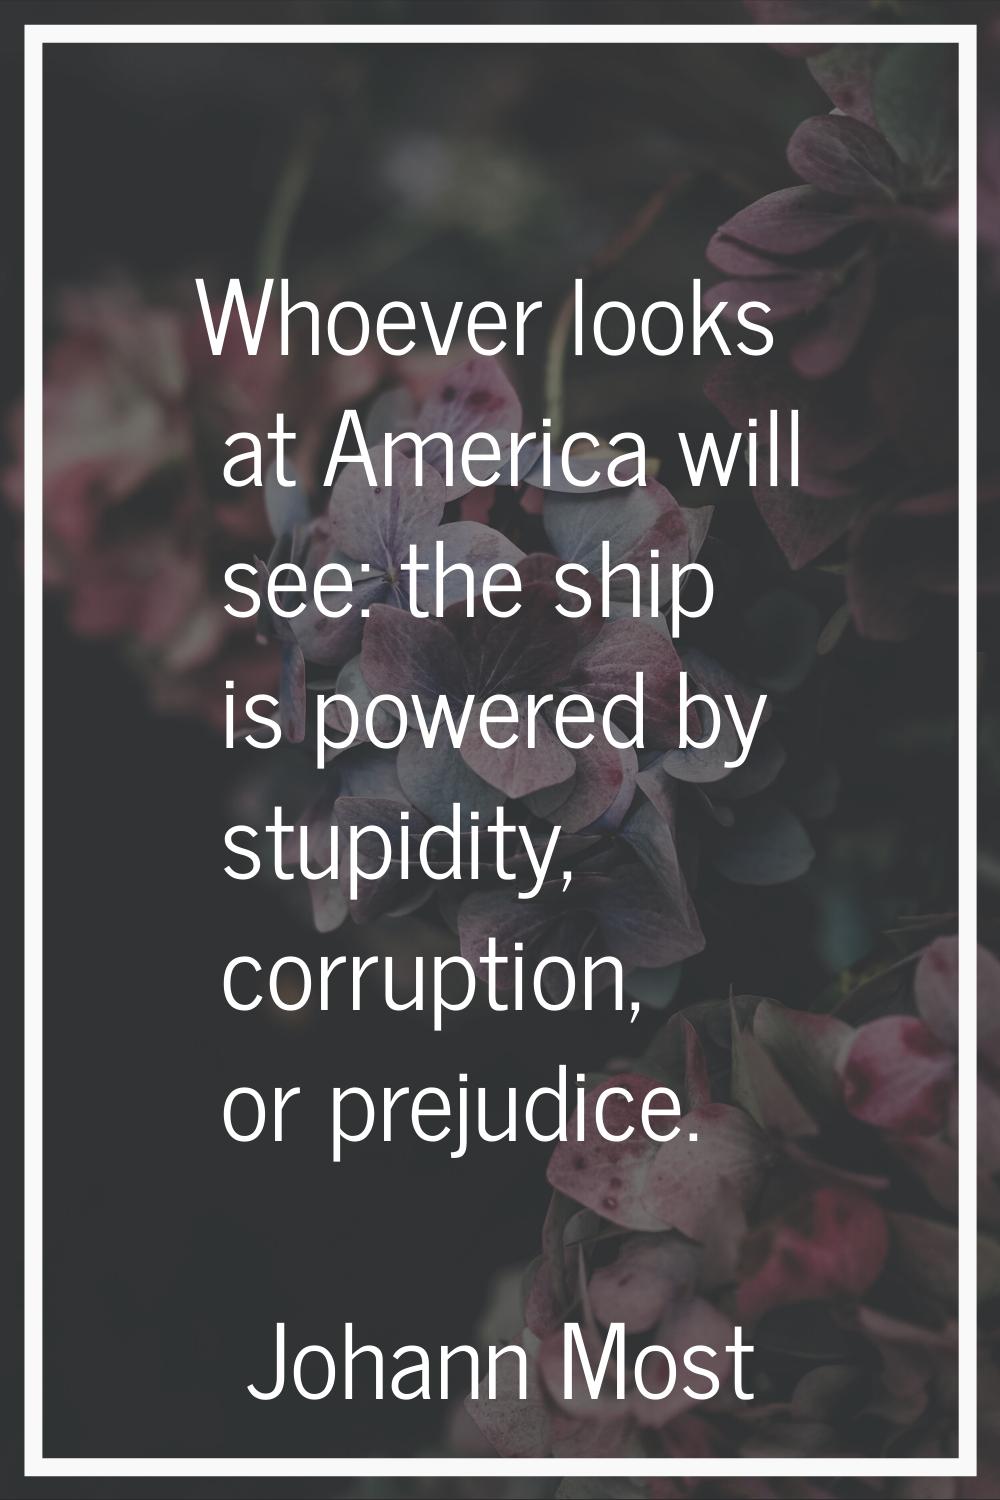 Whoever looks at America will see: the ship is powered by stupidity, corruption, or prejudice.